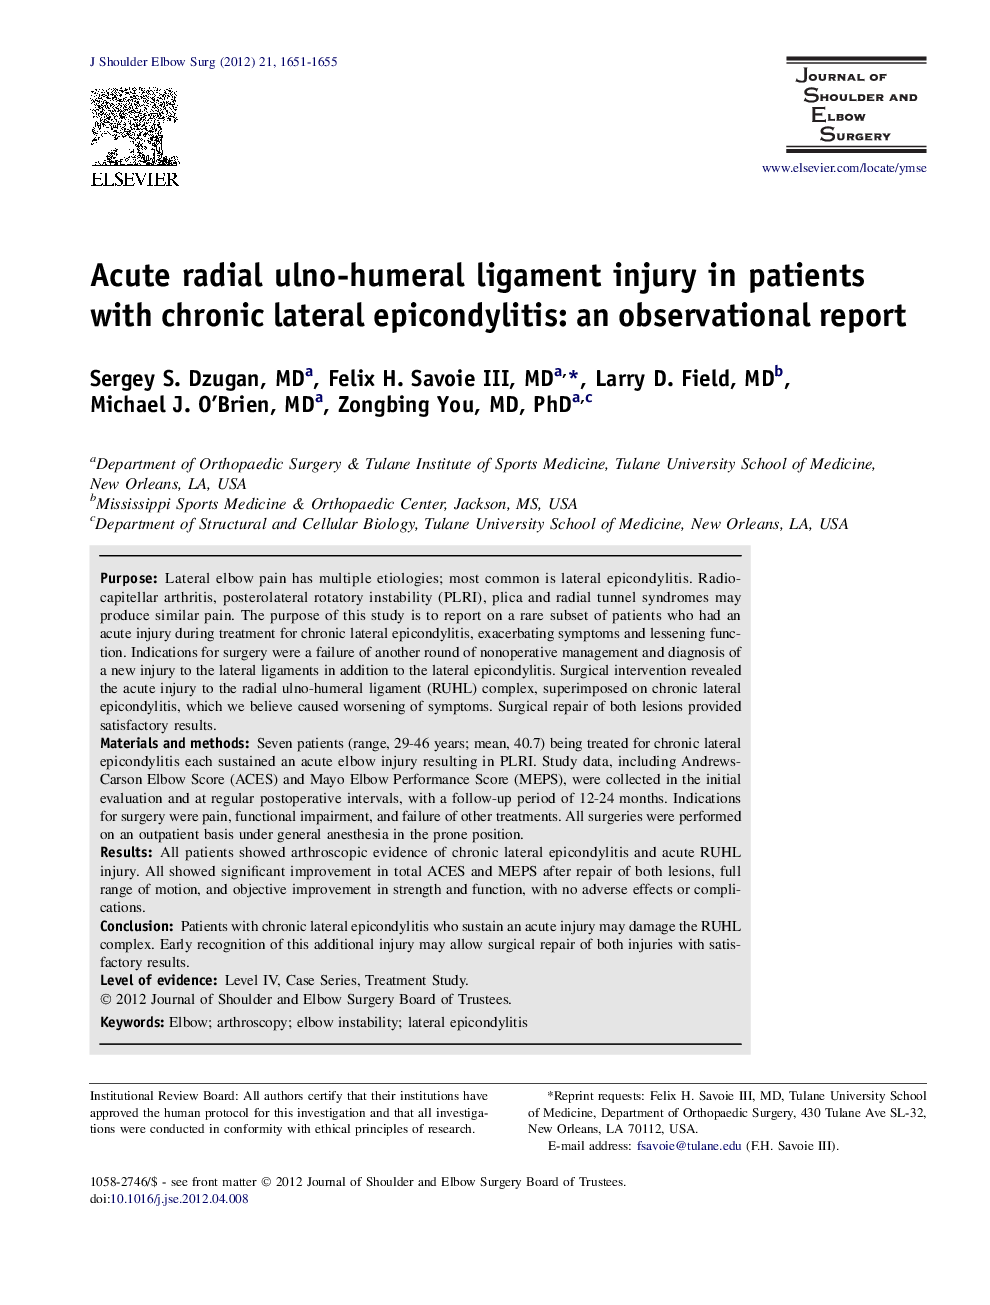 Acute radial ulno-humeral ligament injury in patients with chronic lateral epicondylitis: an observational report 